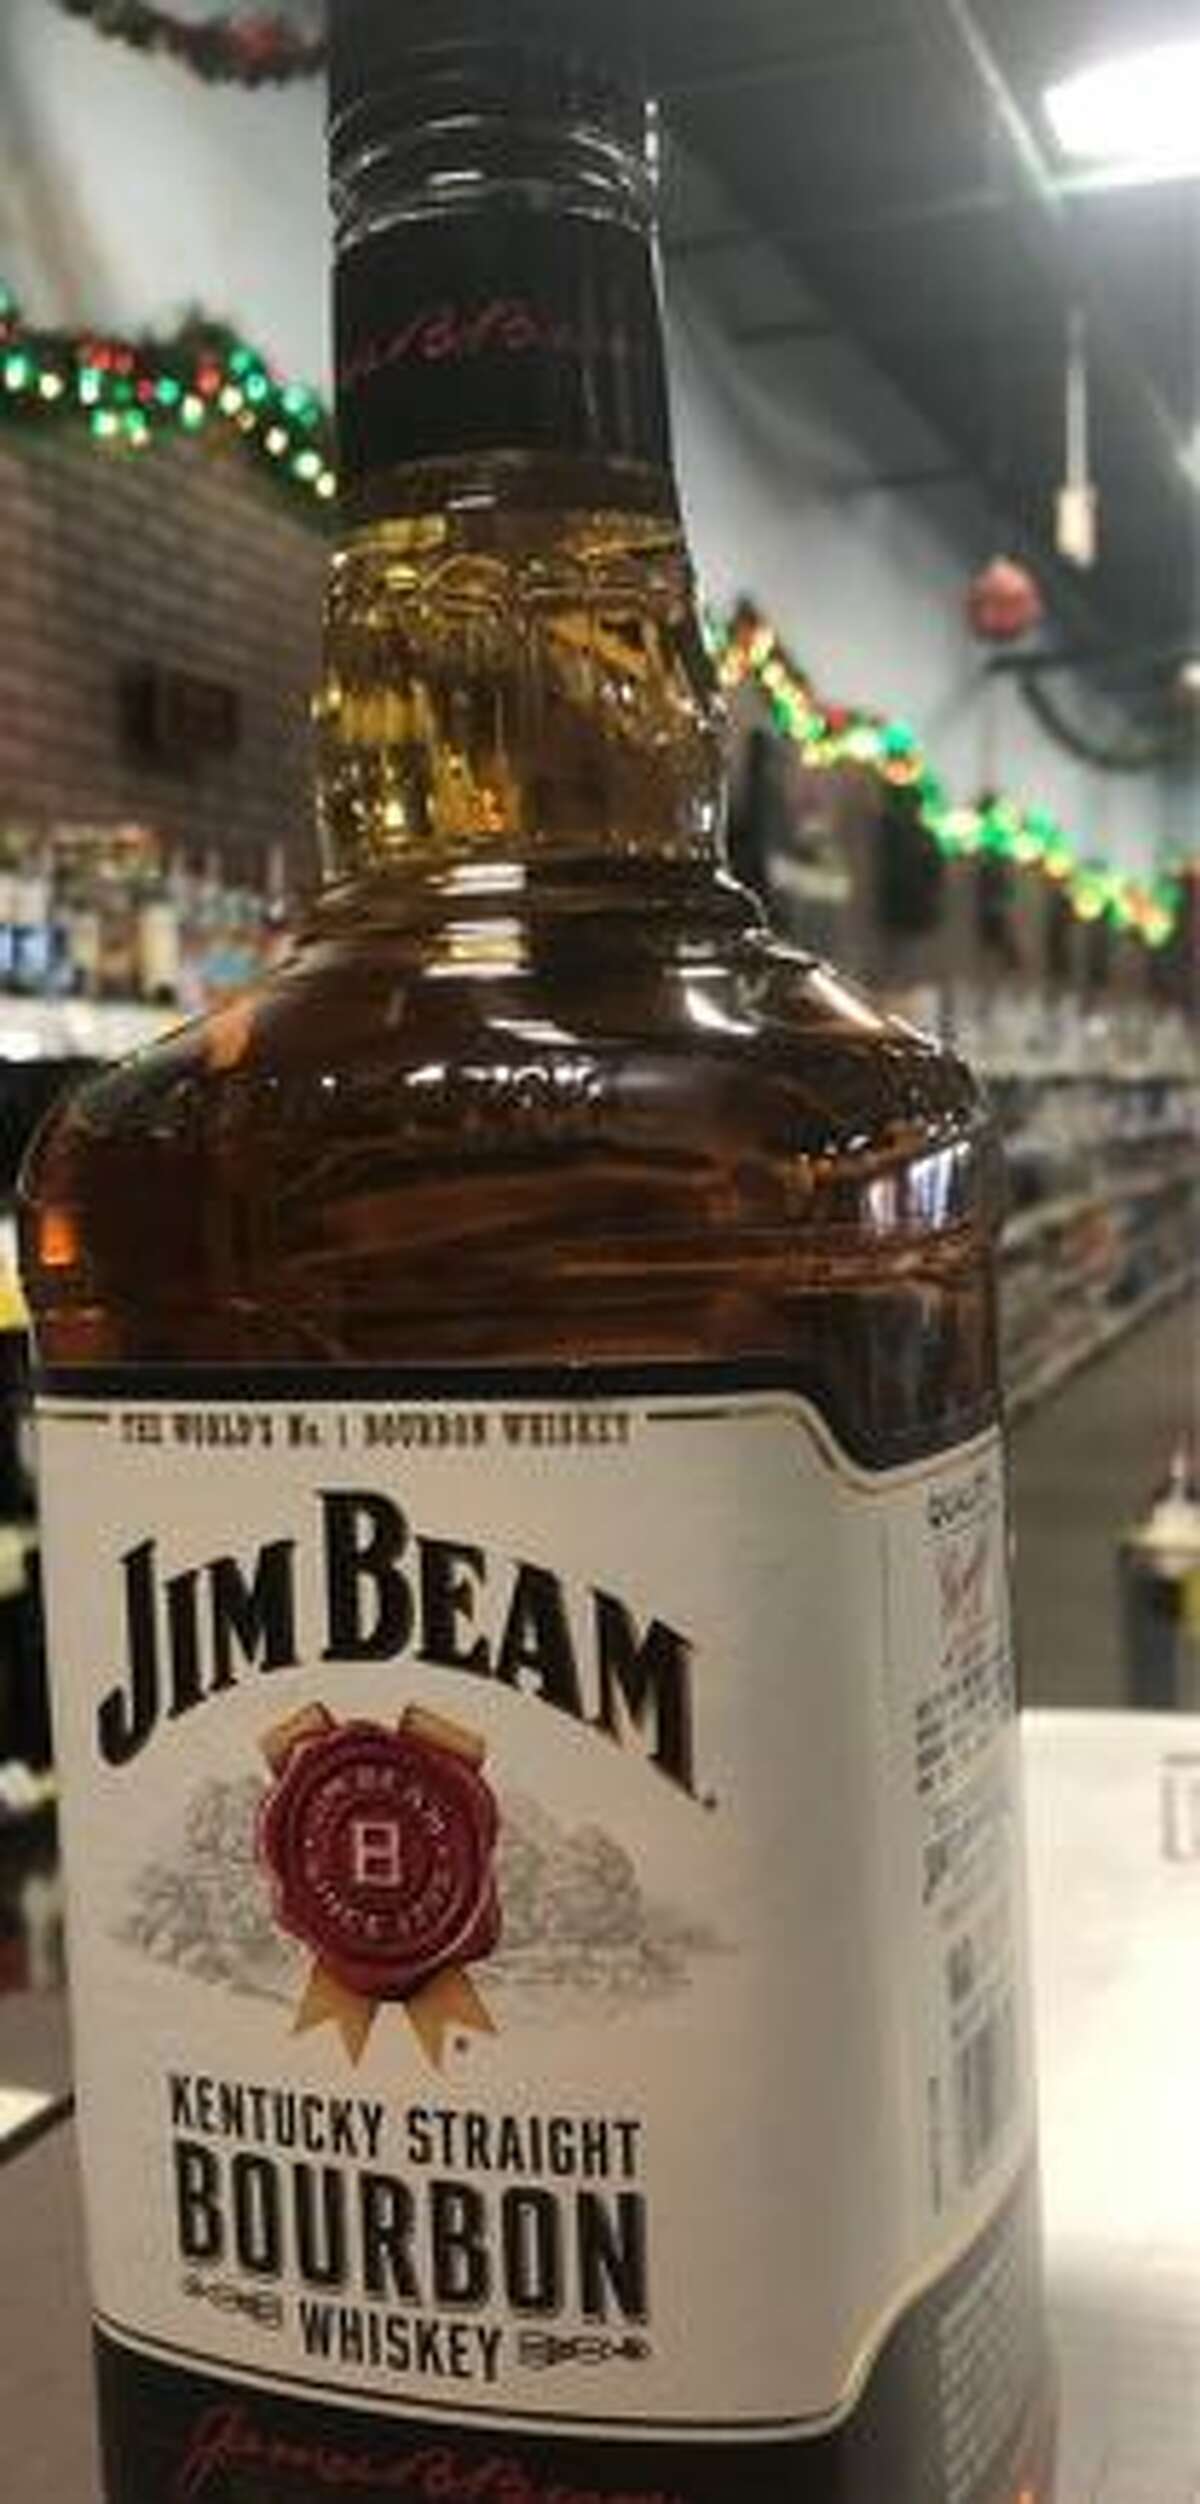 Some popular varieties and sizes of bourbon and other whiskeys are coming in plastic bottles due to a glass bottle shortage.